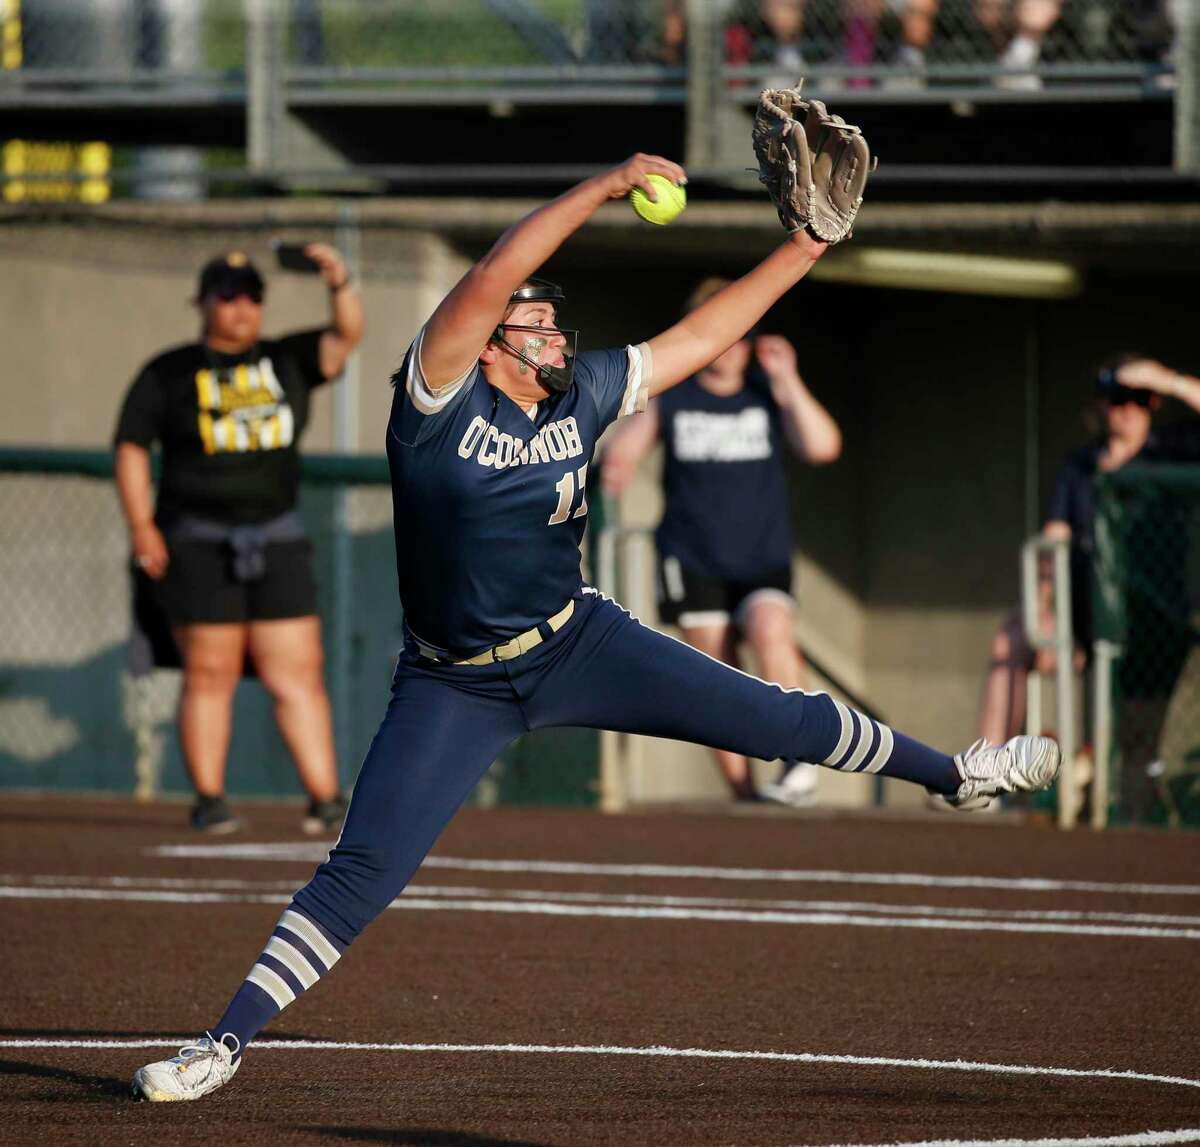 O’Connor pitcher Sammie Portillo (17) delivers a pitch in the first inning In a 6A Regional IV quarterfinals High School Softball where O'Connor defeated Brenann 12-3 at Northside Field on Friday, May 13, 2022.